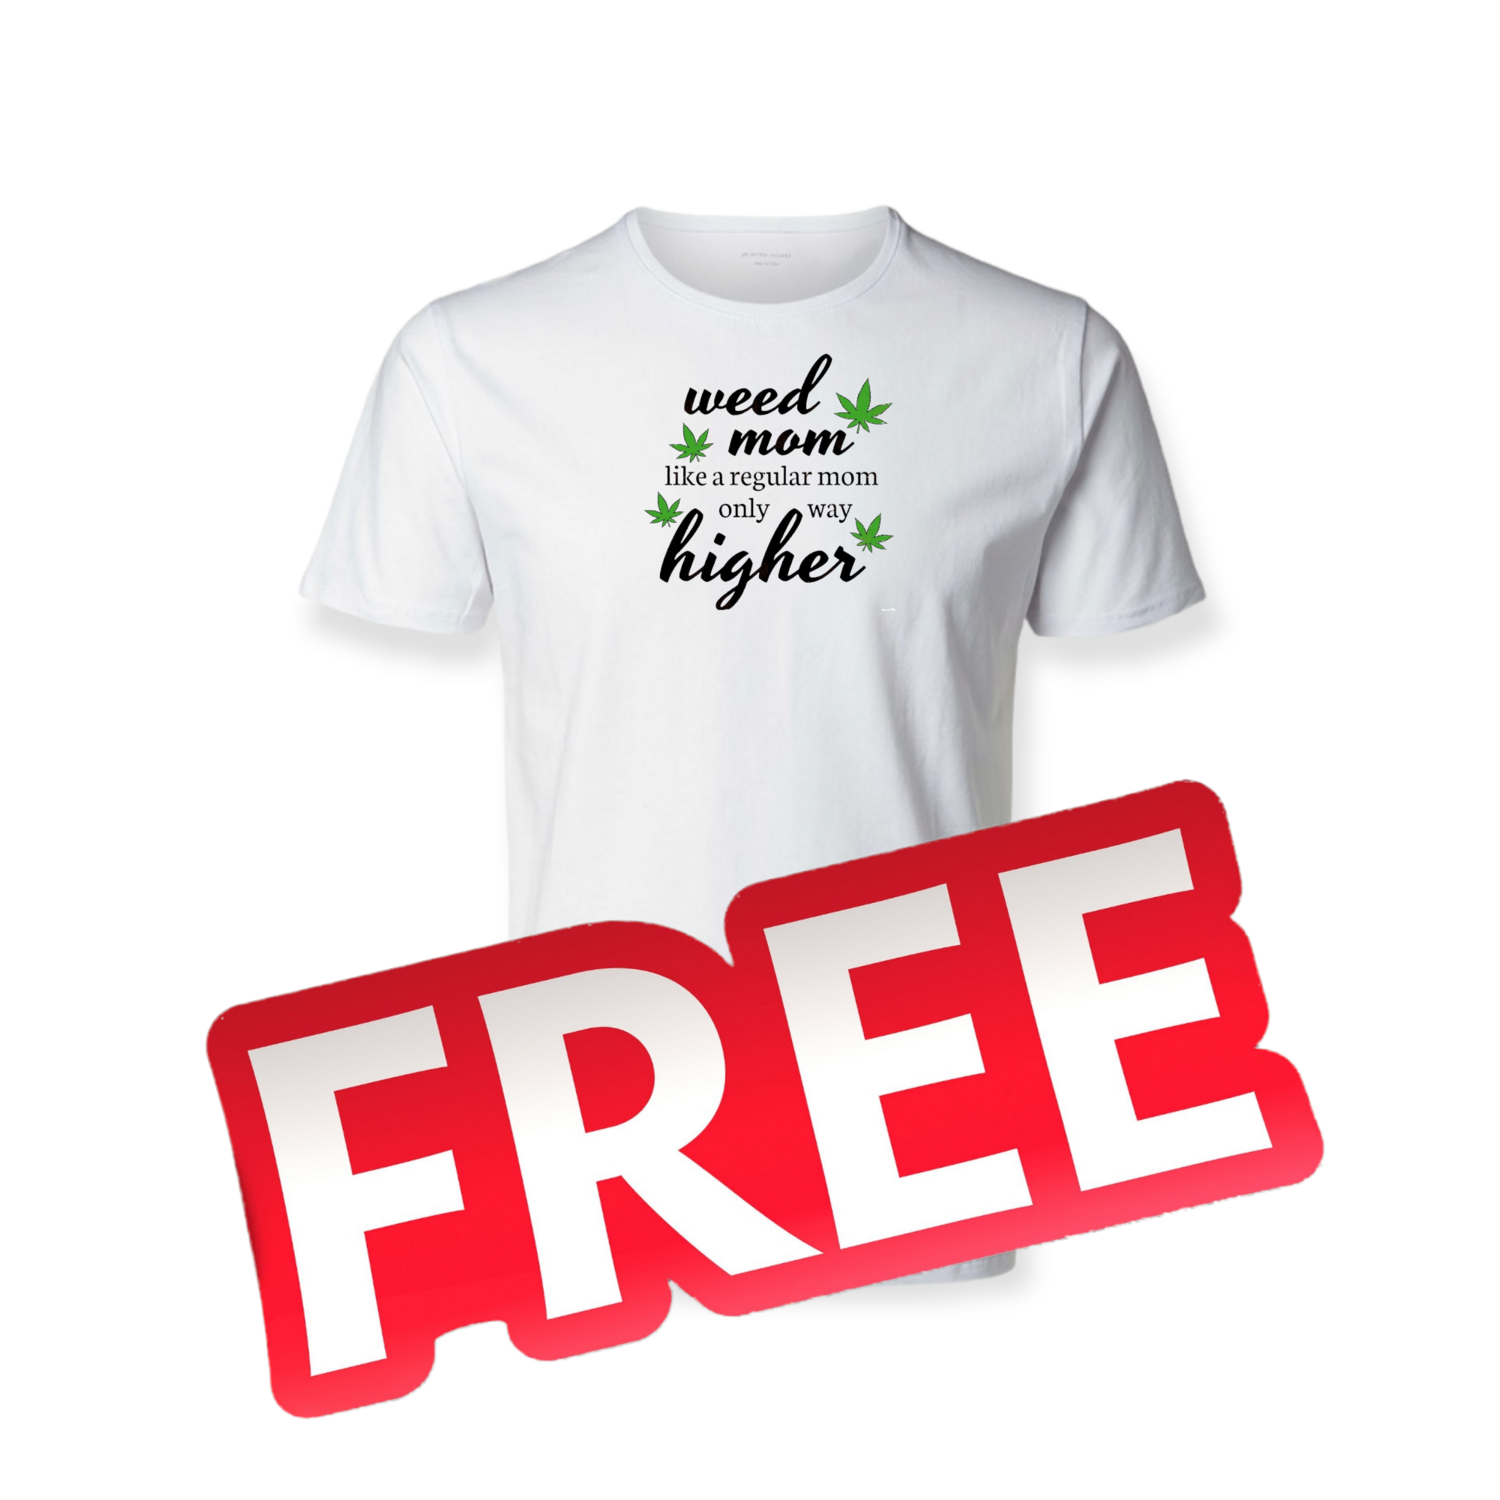 FREE T SHIRT mother's  EDITION weed mom 
Only small to xl is free anything bigger  is a lil extra